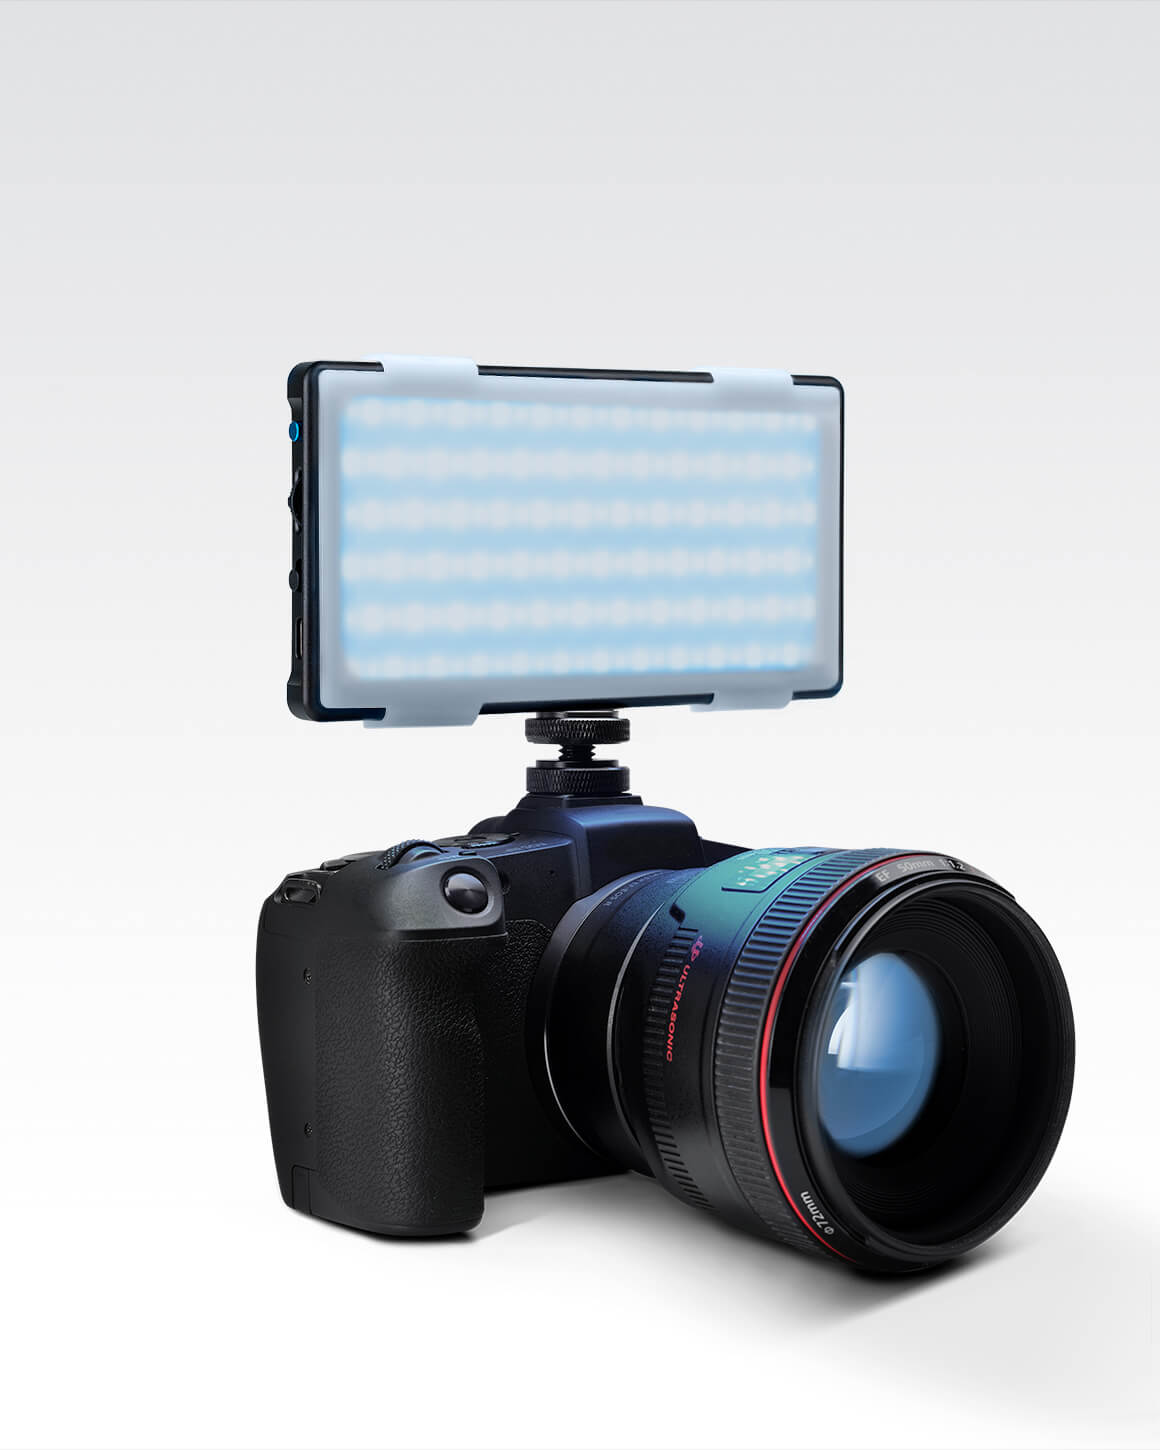 Animated gif of RGB Panel Pro 2.0 changing colors on DSLR camera